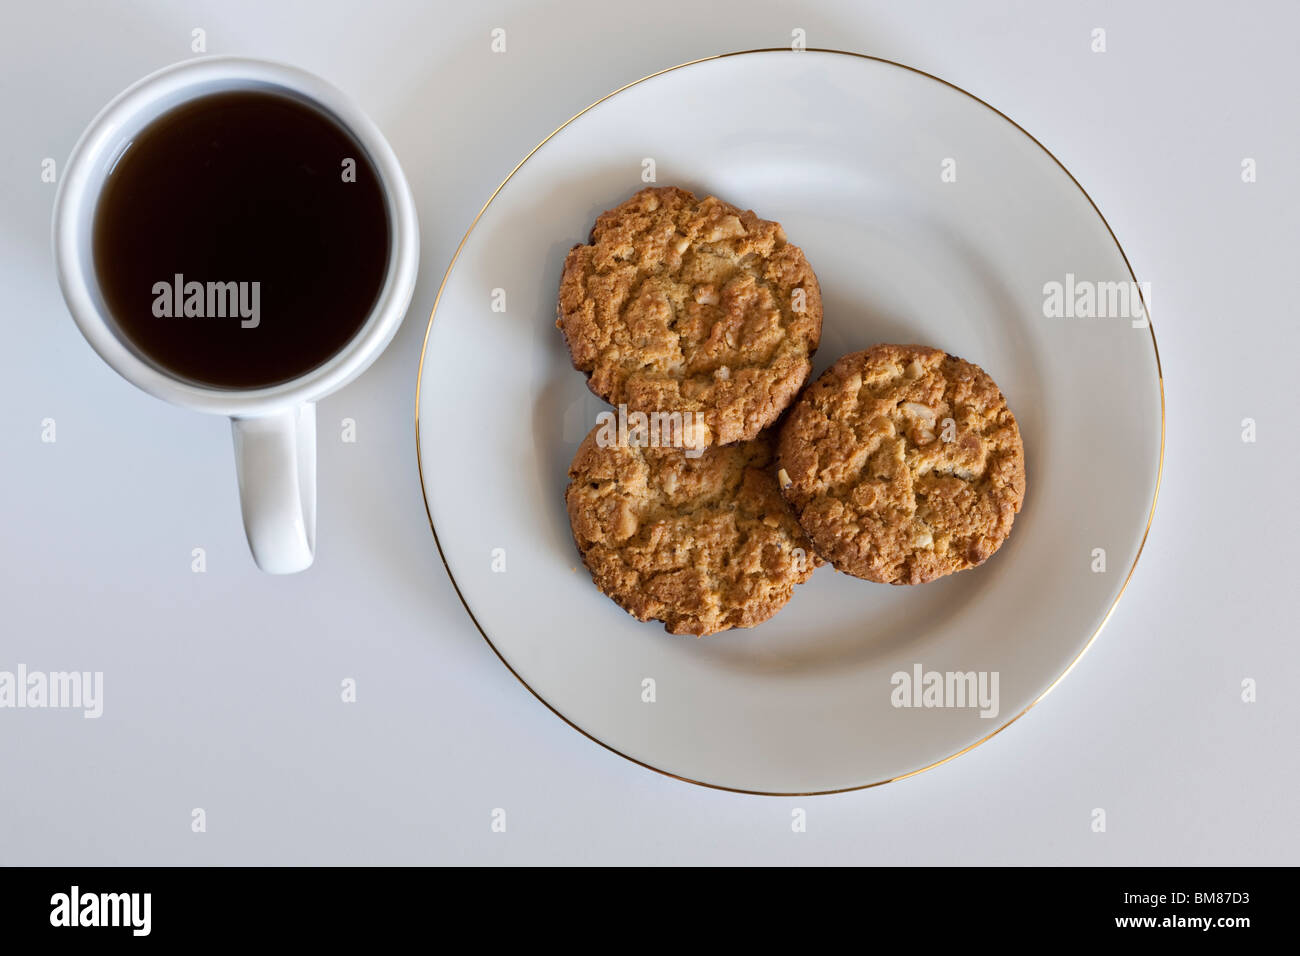 White cup of black coffee and three chocolate crumbly cookies on a white plate Stock Photo